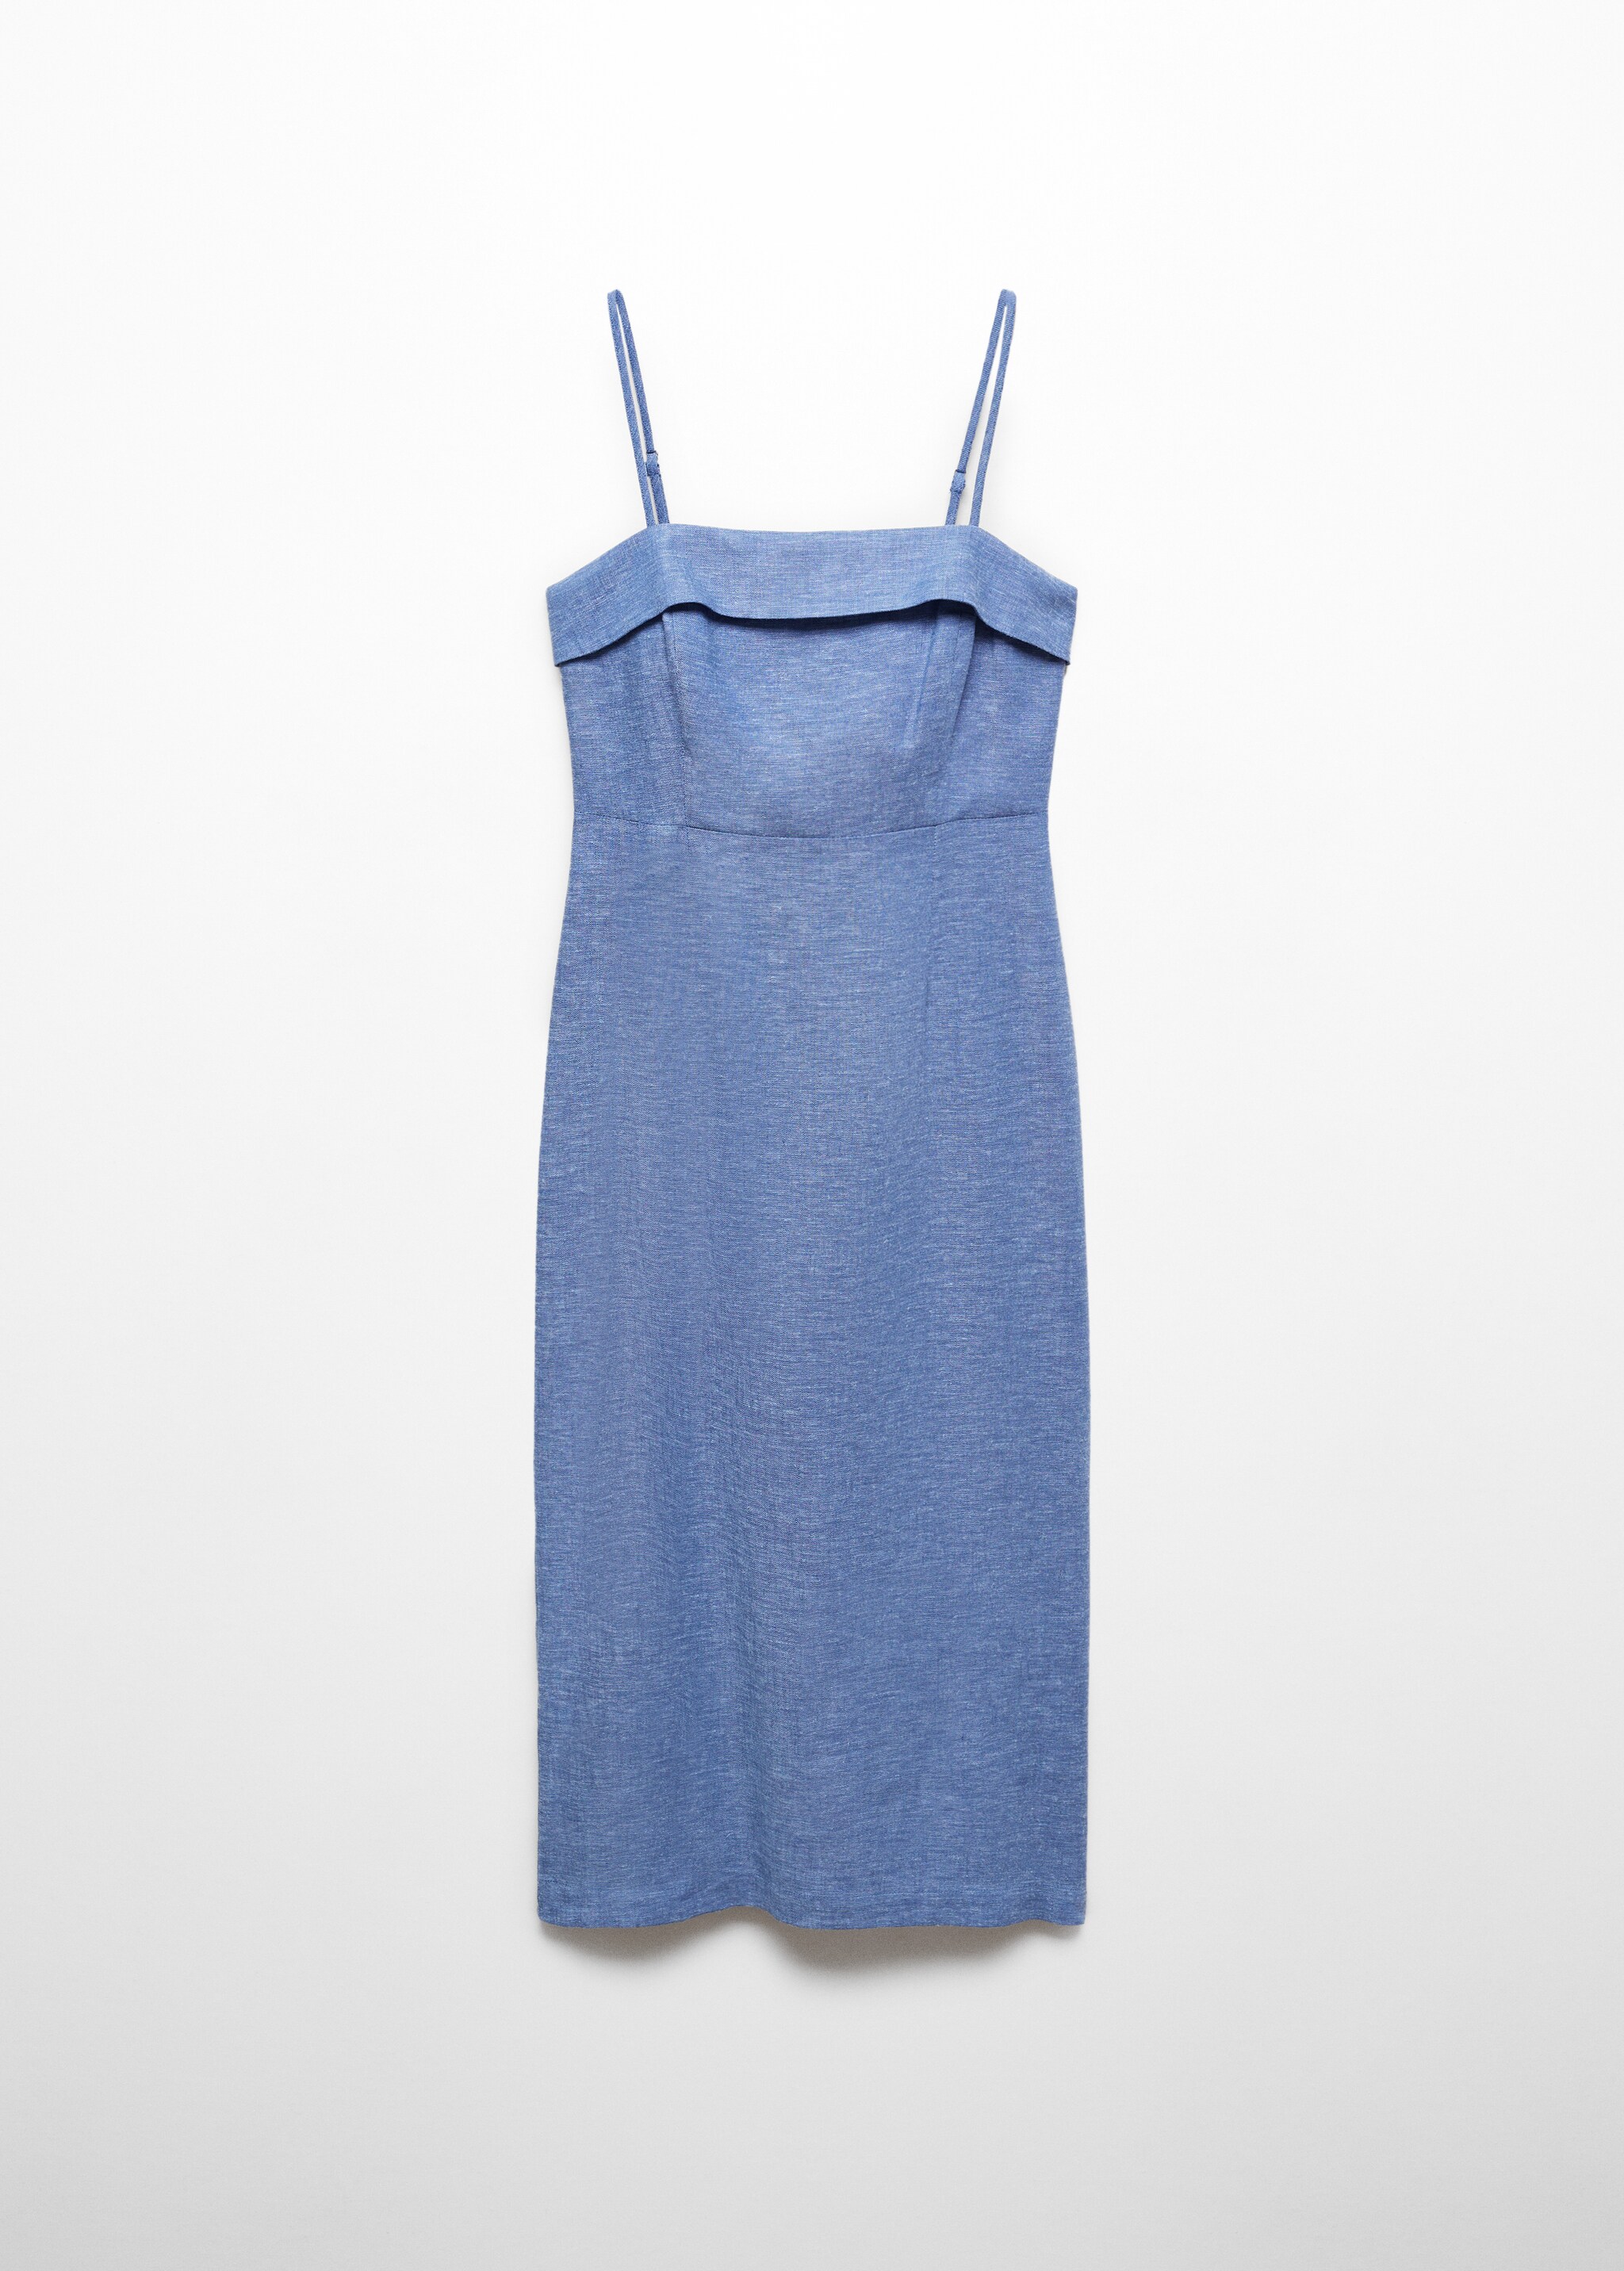 Linen strap dress - Article without model